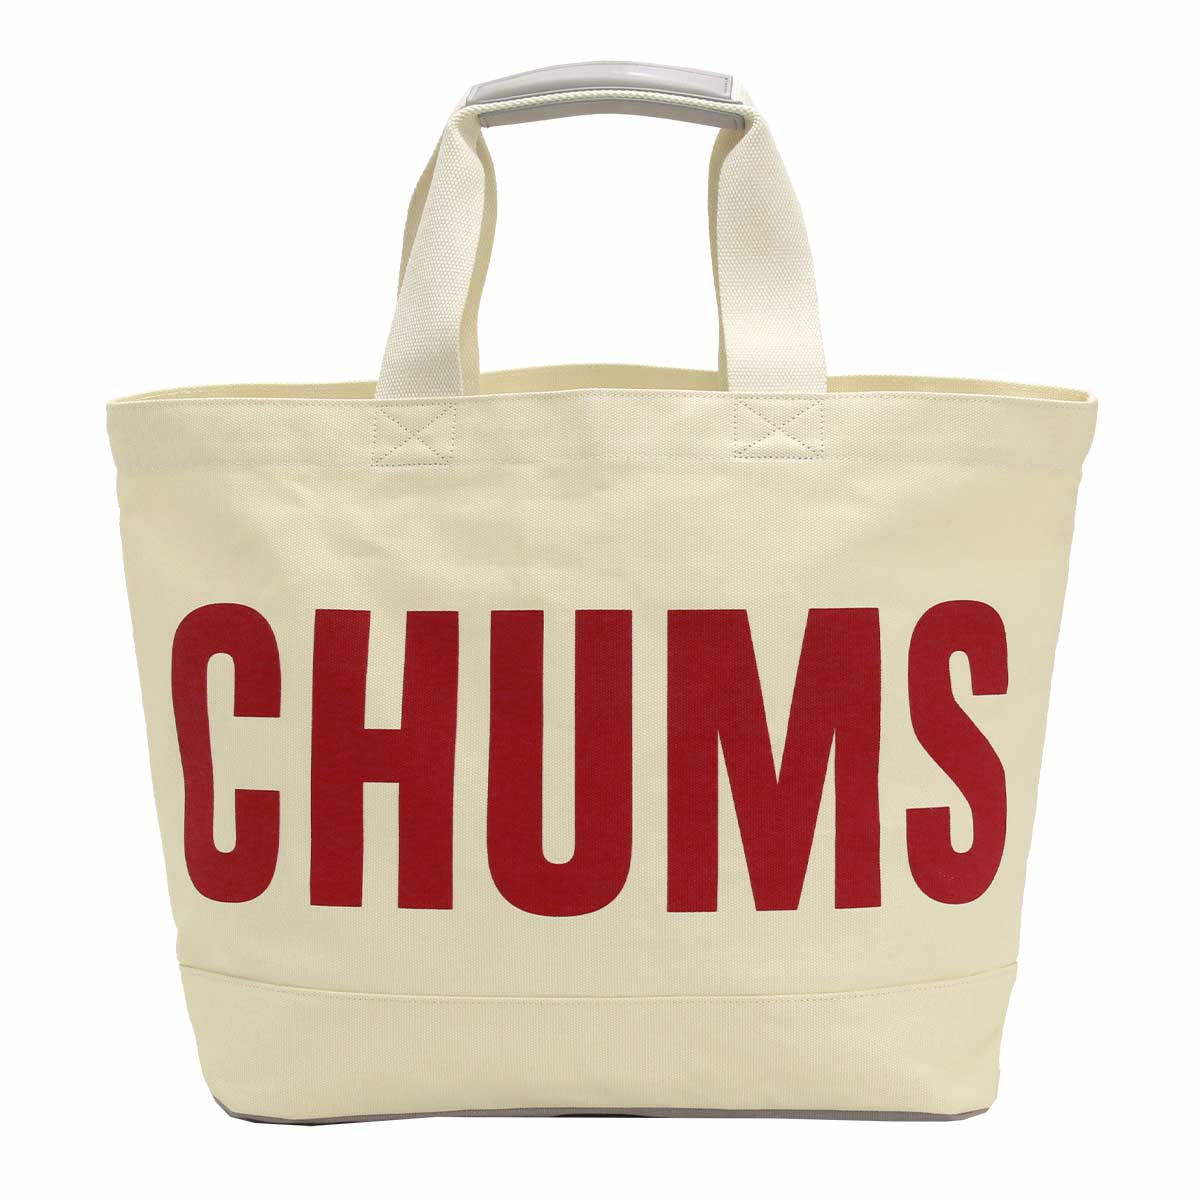 CHUMS チャムス Big CHUMS Canvas Large Tote トートバッグ トート ...